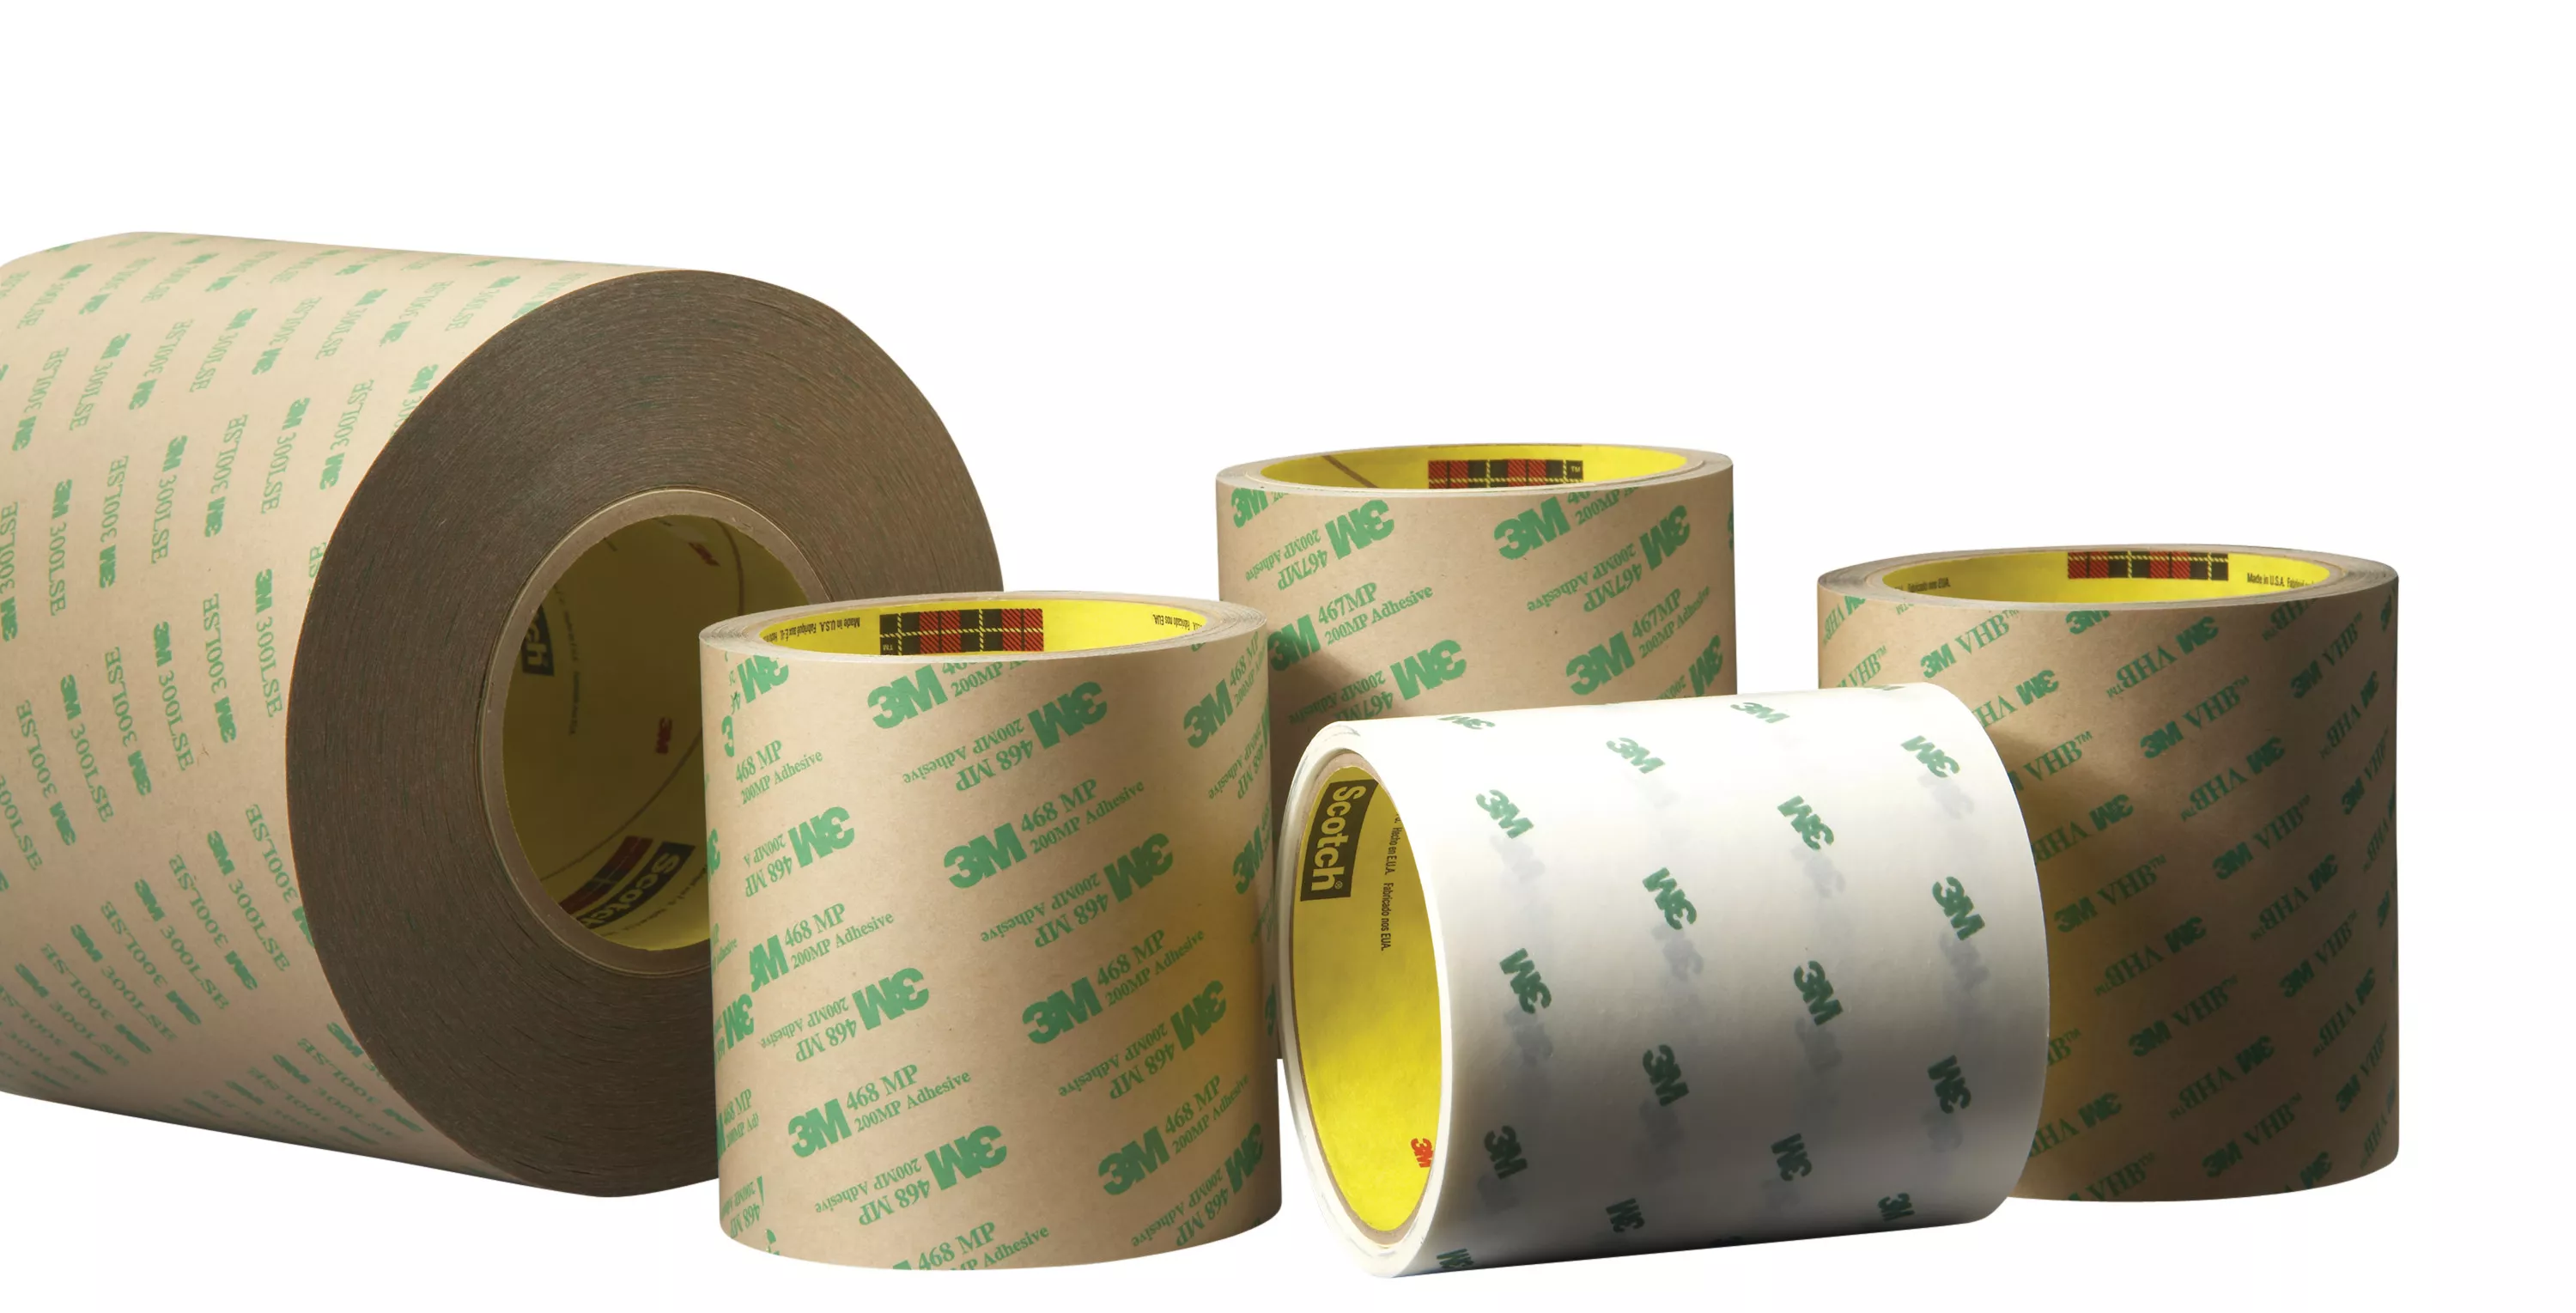 3M™ VHB™ Adhesive Transfer Tape F9473PC, Clear, 60 in x 180 yd, 10 mil,
1 Roll/Case